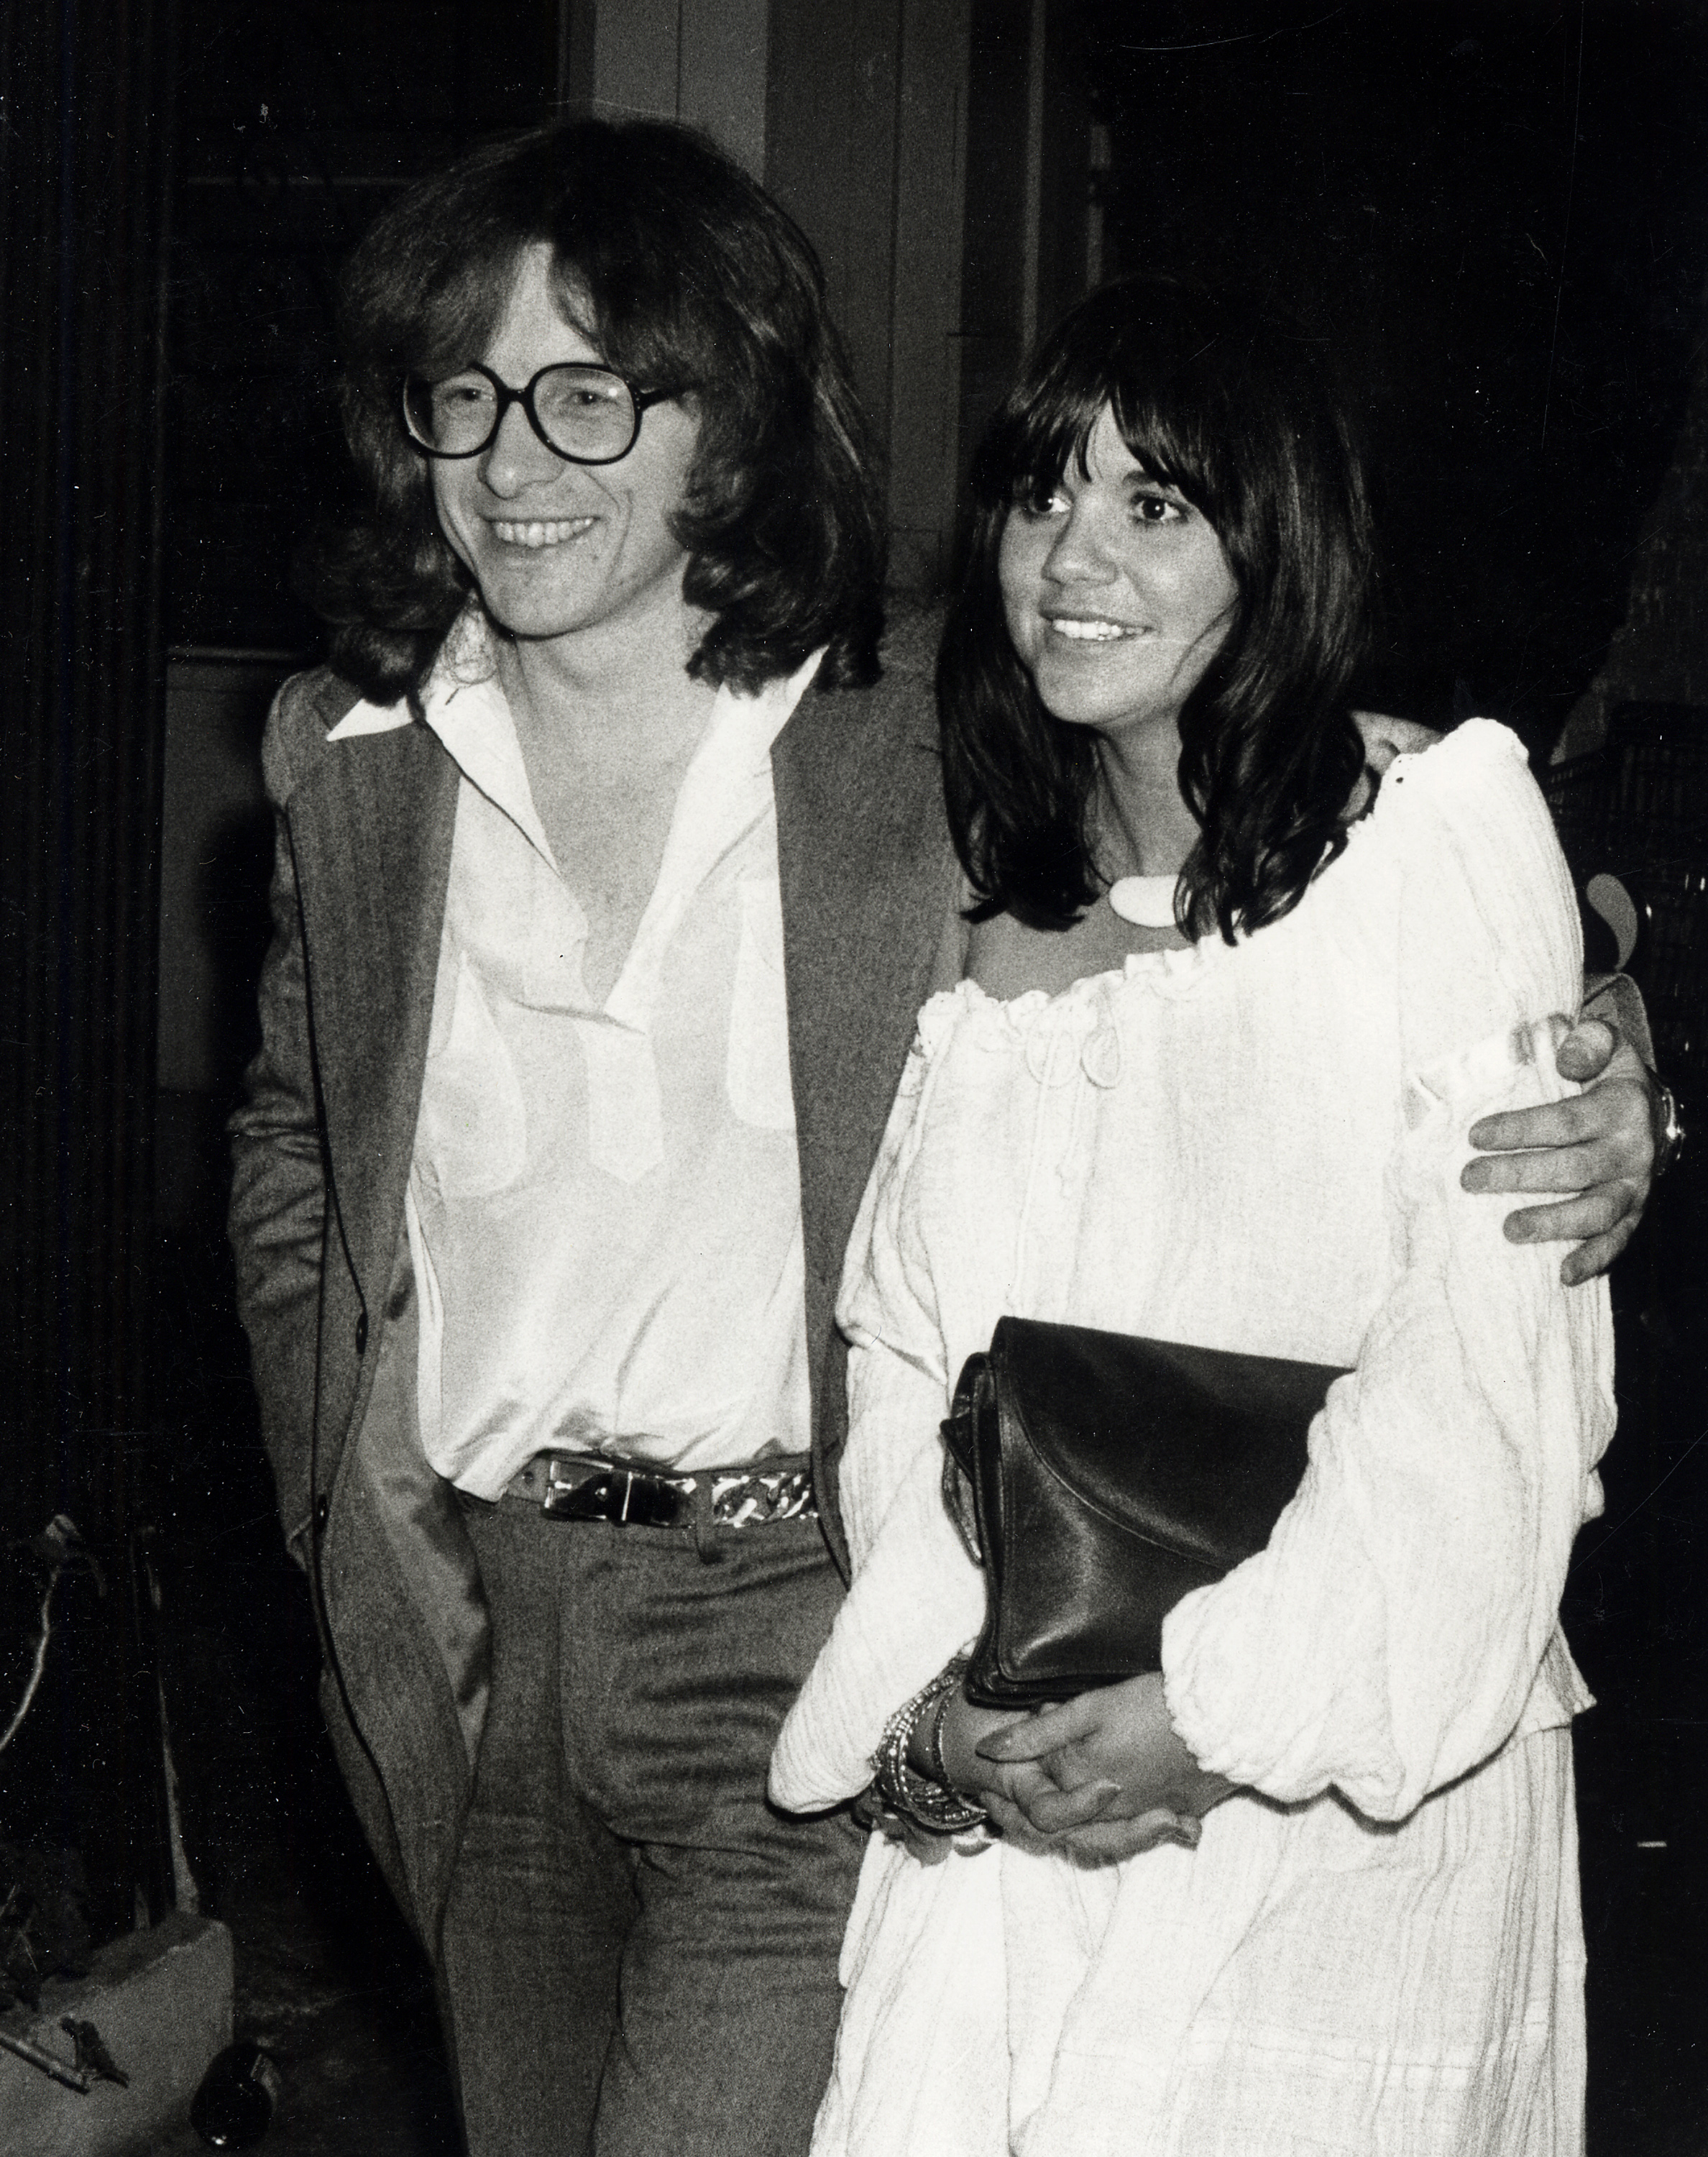 Singer Linda Ronstadt and agent Dan Ashby photographed on March 7, 1978, at Dan Tana's Restaurant in Los Angeles, California | Source: Getty Images